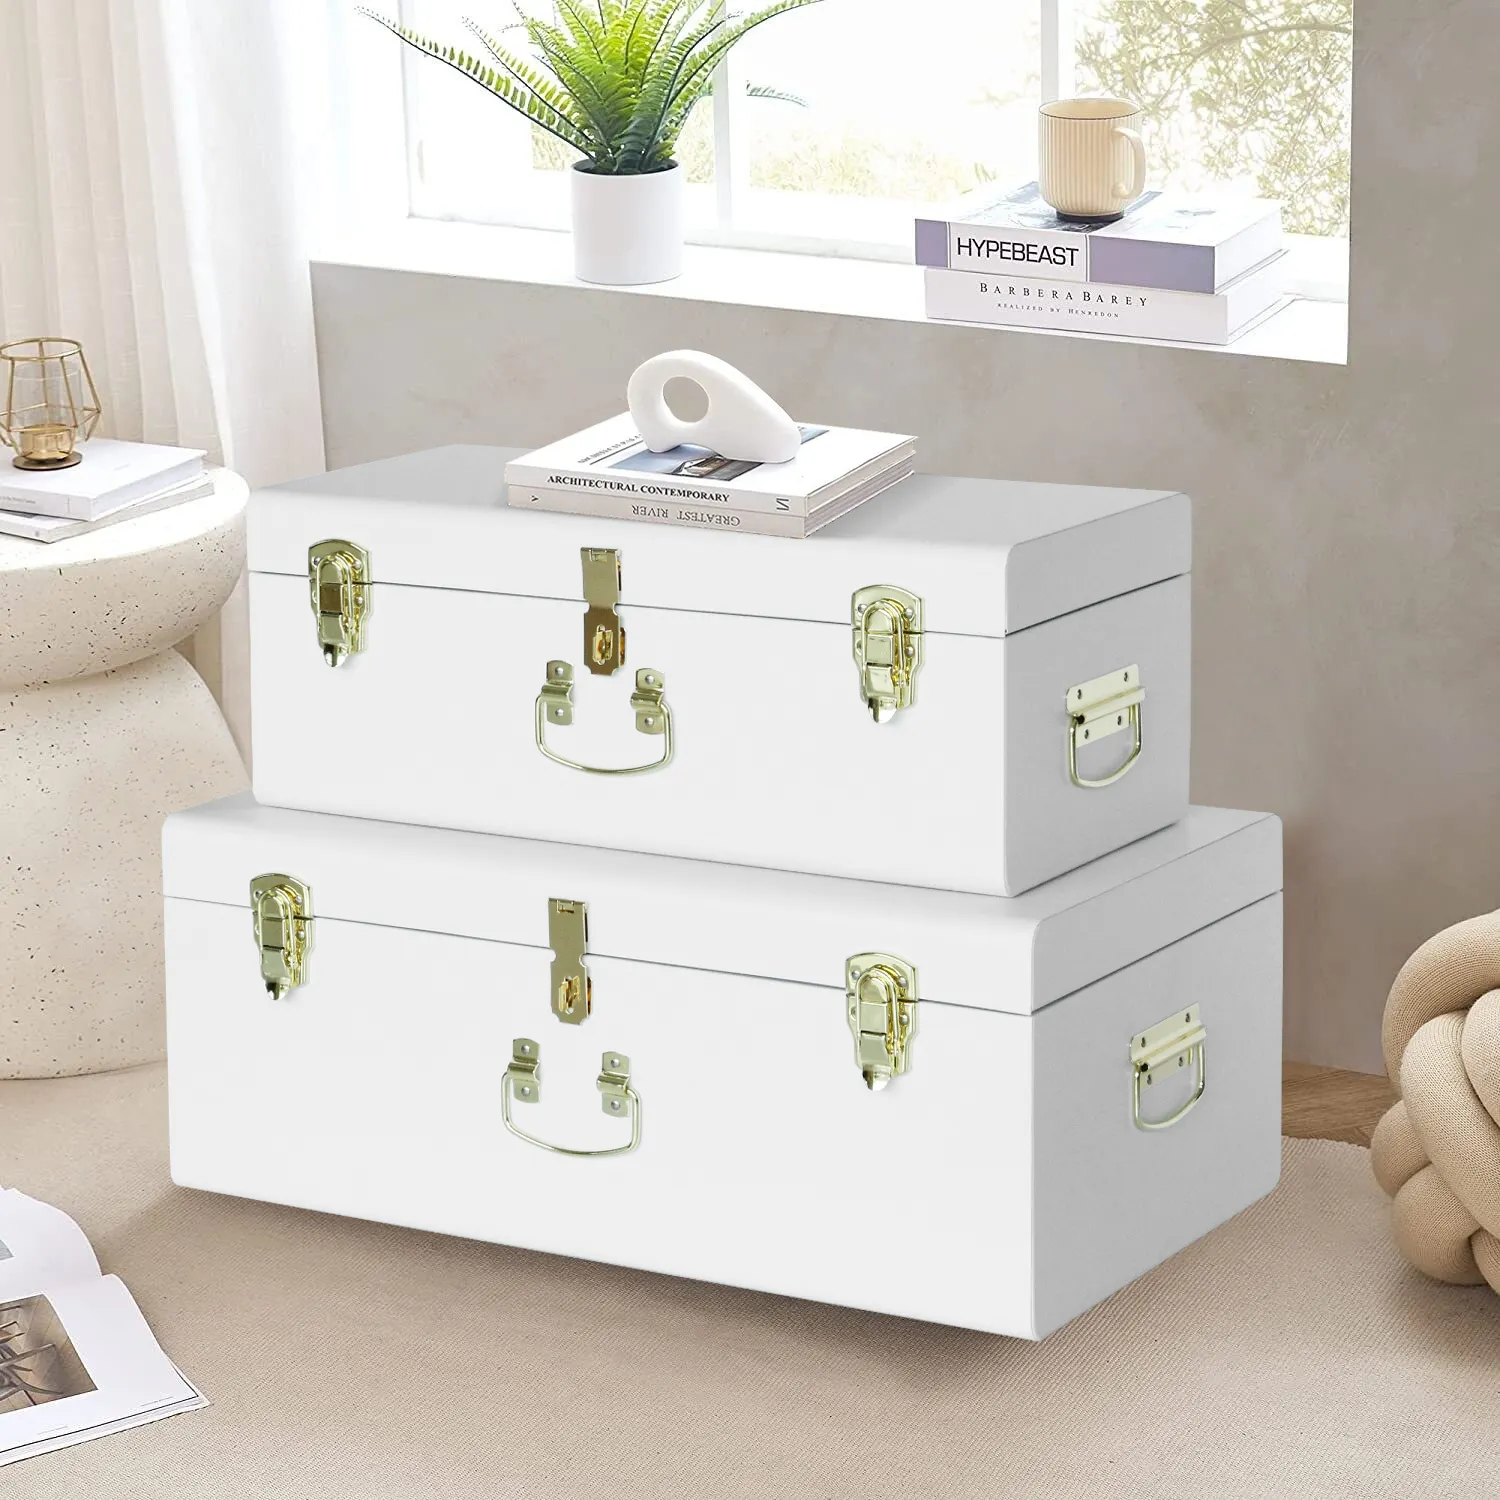 Metal storage trunk set of 2 White trunks storage with gold metal lock accessories